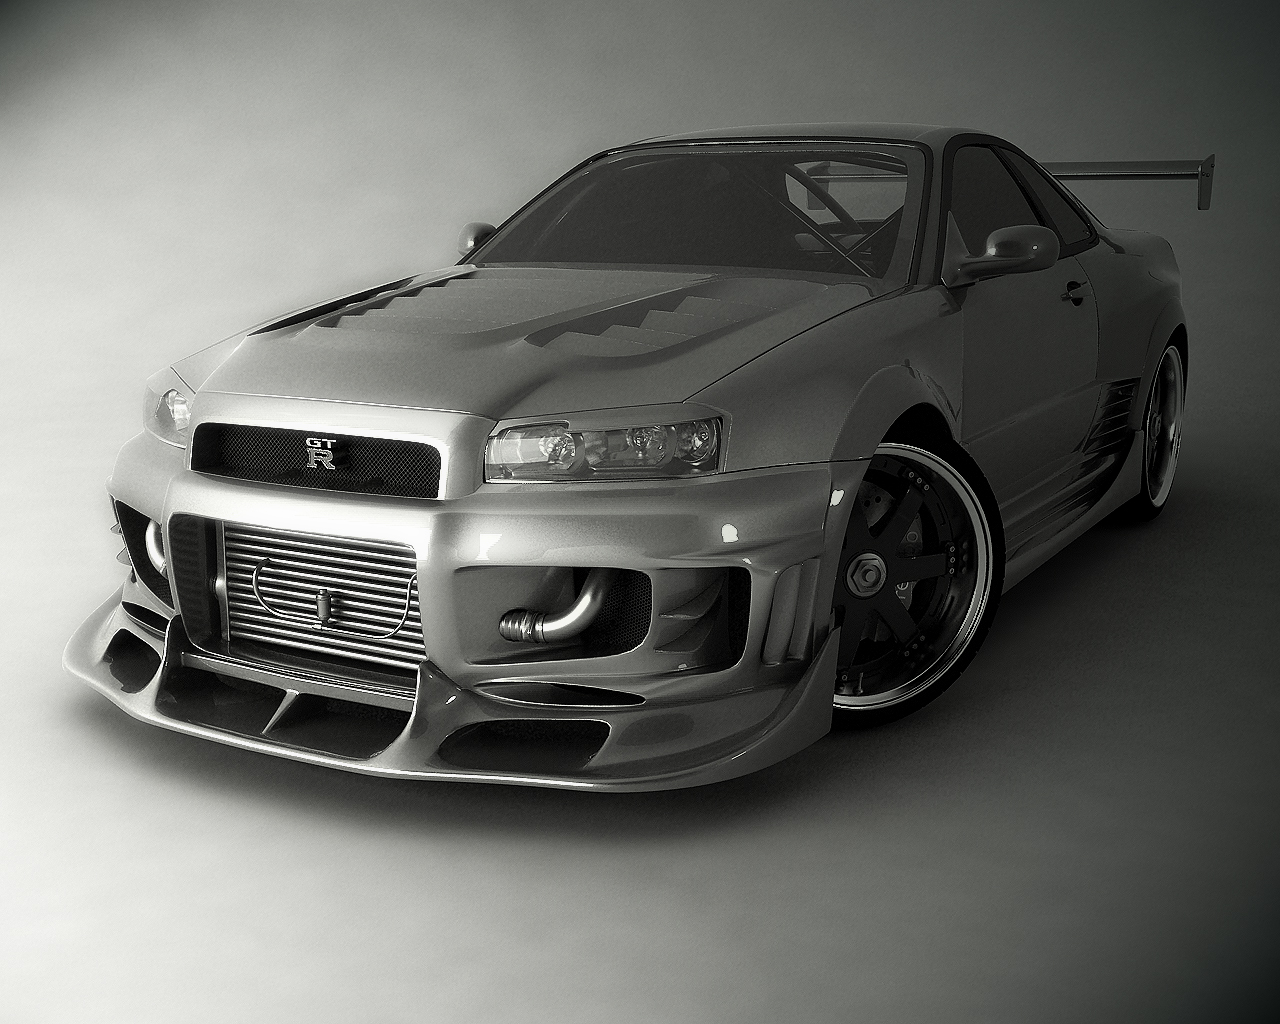 Nissan Skyline Gtr Pictures And Wallpaper